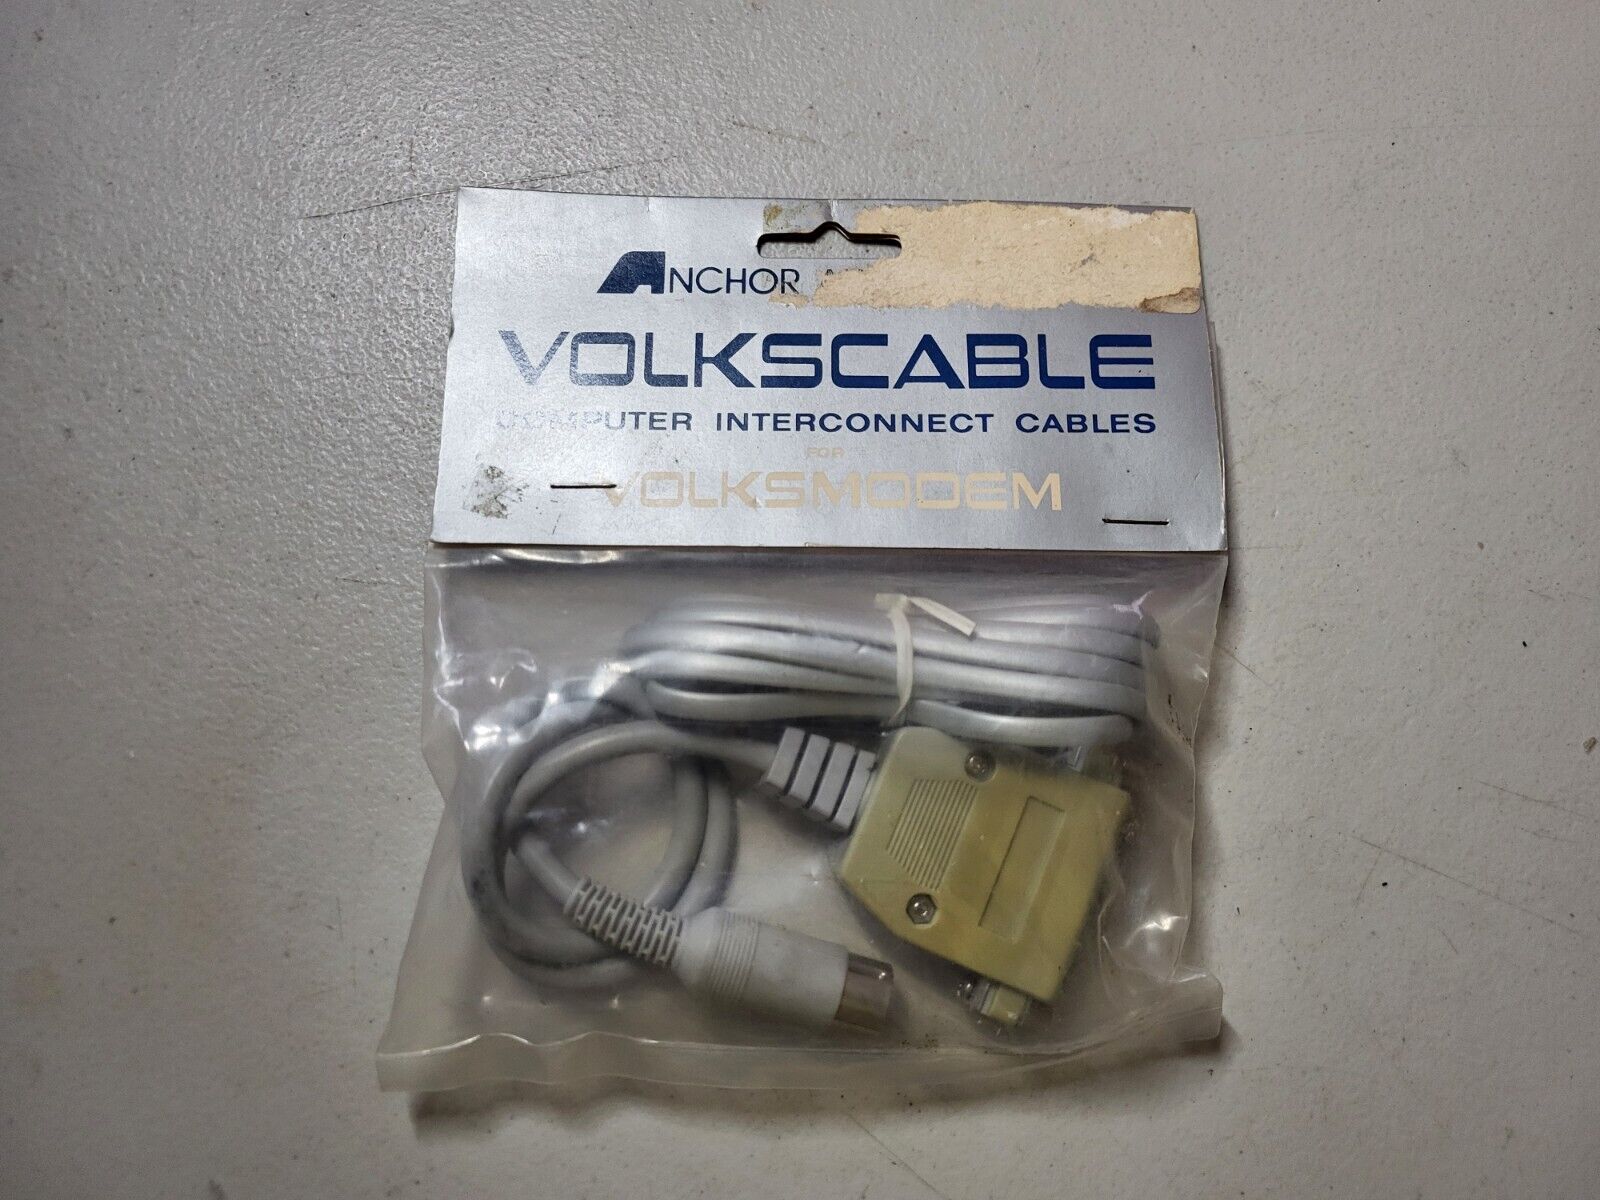 VOLKSMODEM Cable Volkscable Vintage Collectible 18” RS-232 NEW OLD STOCK